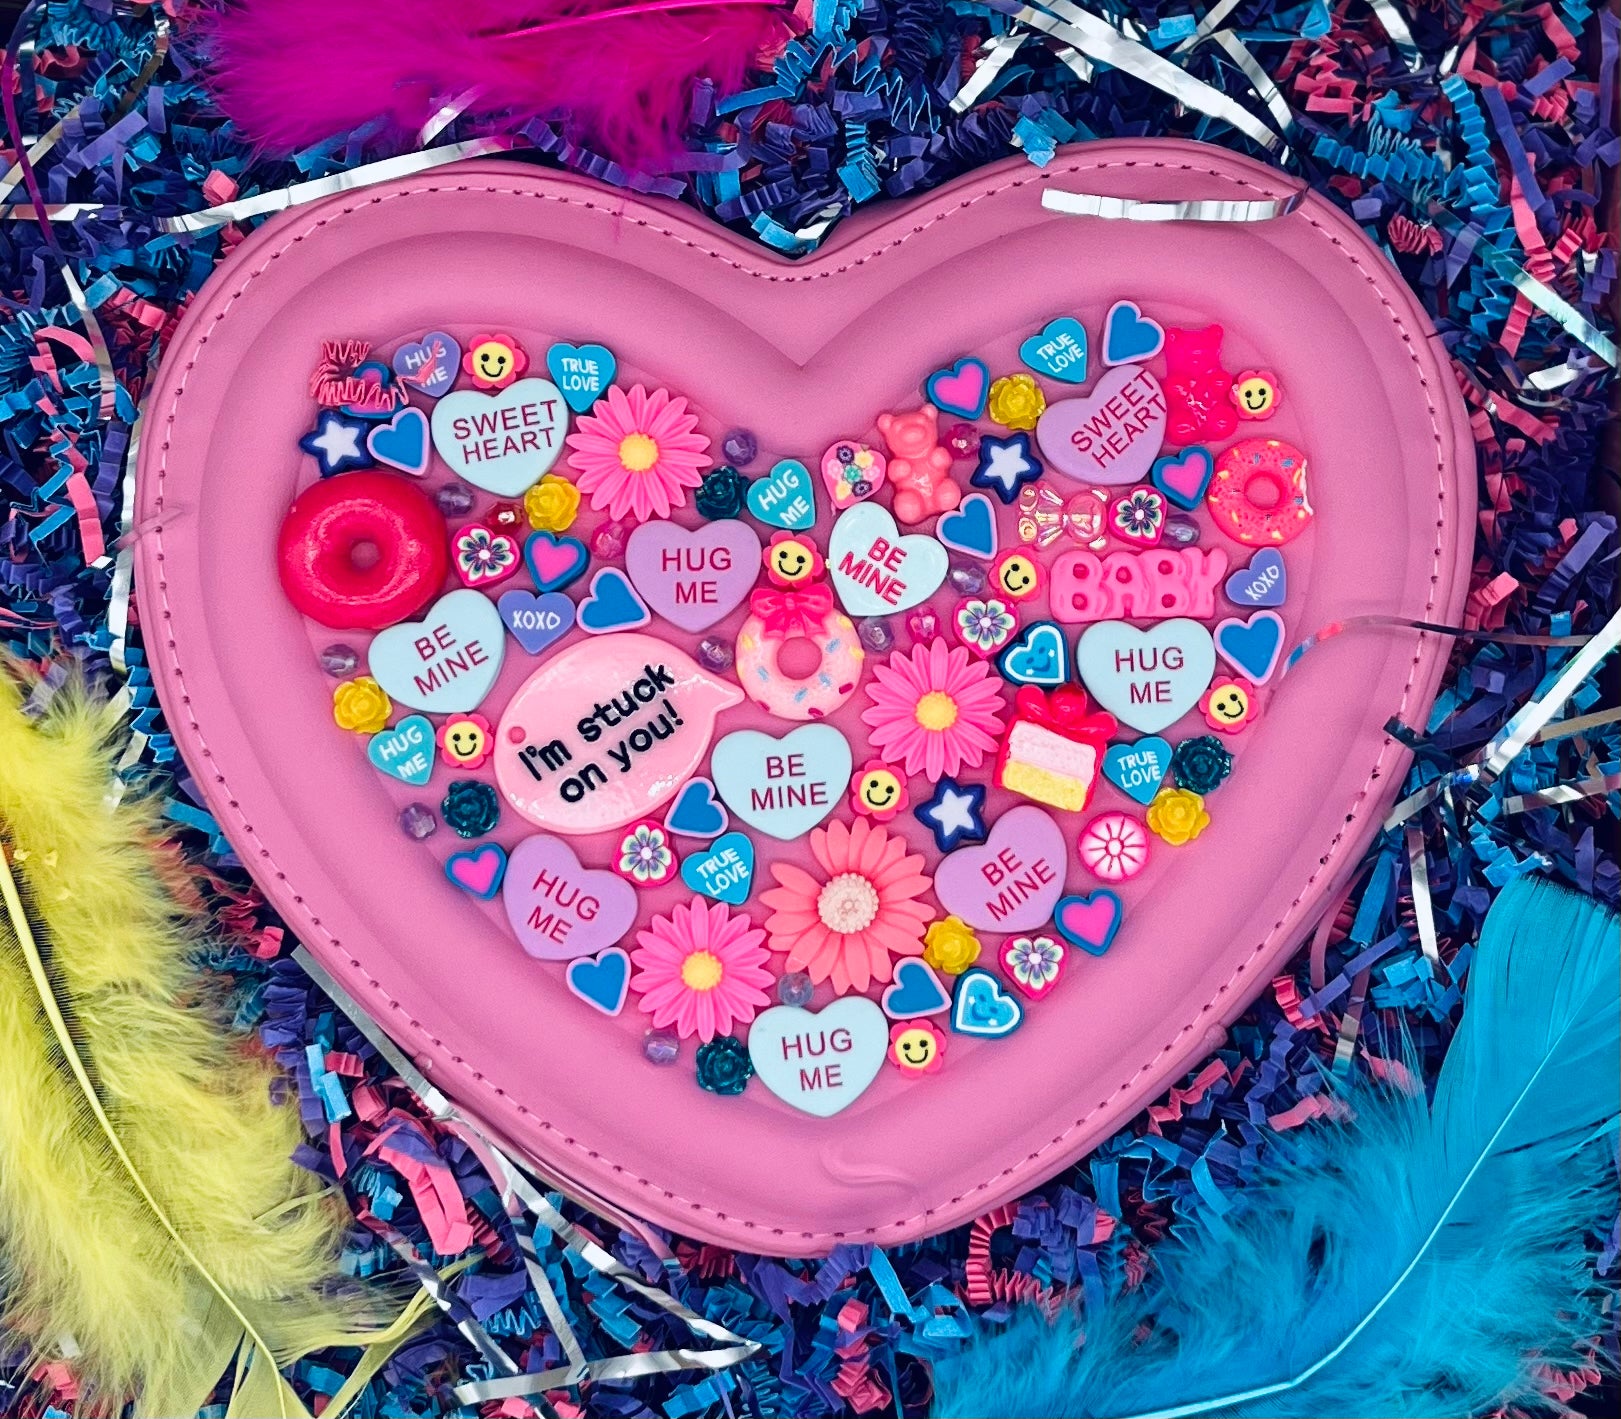 Sweetheart Novelty Purse topped with Extra Hearts and Jewels – Kick.Rox.Shop